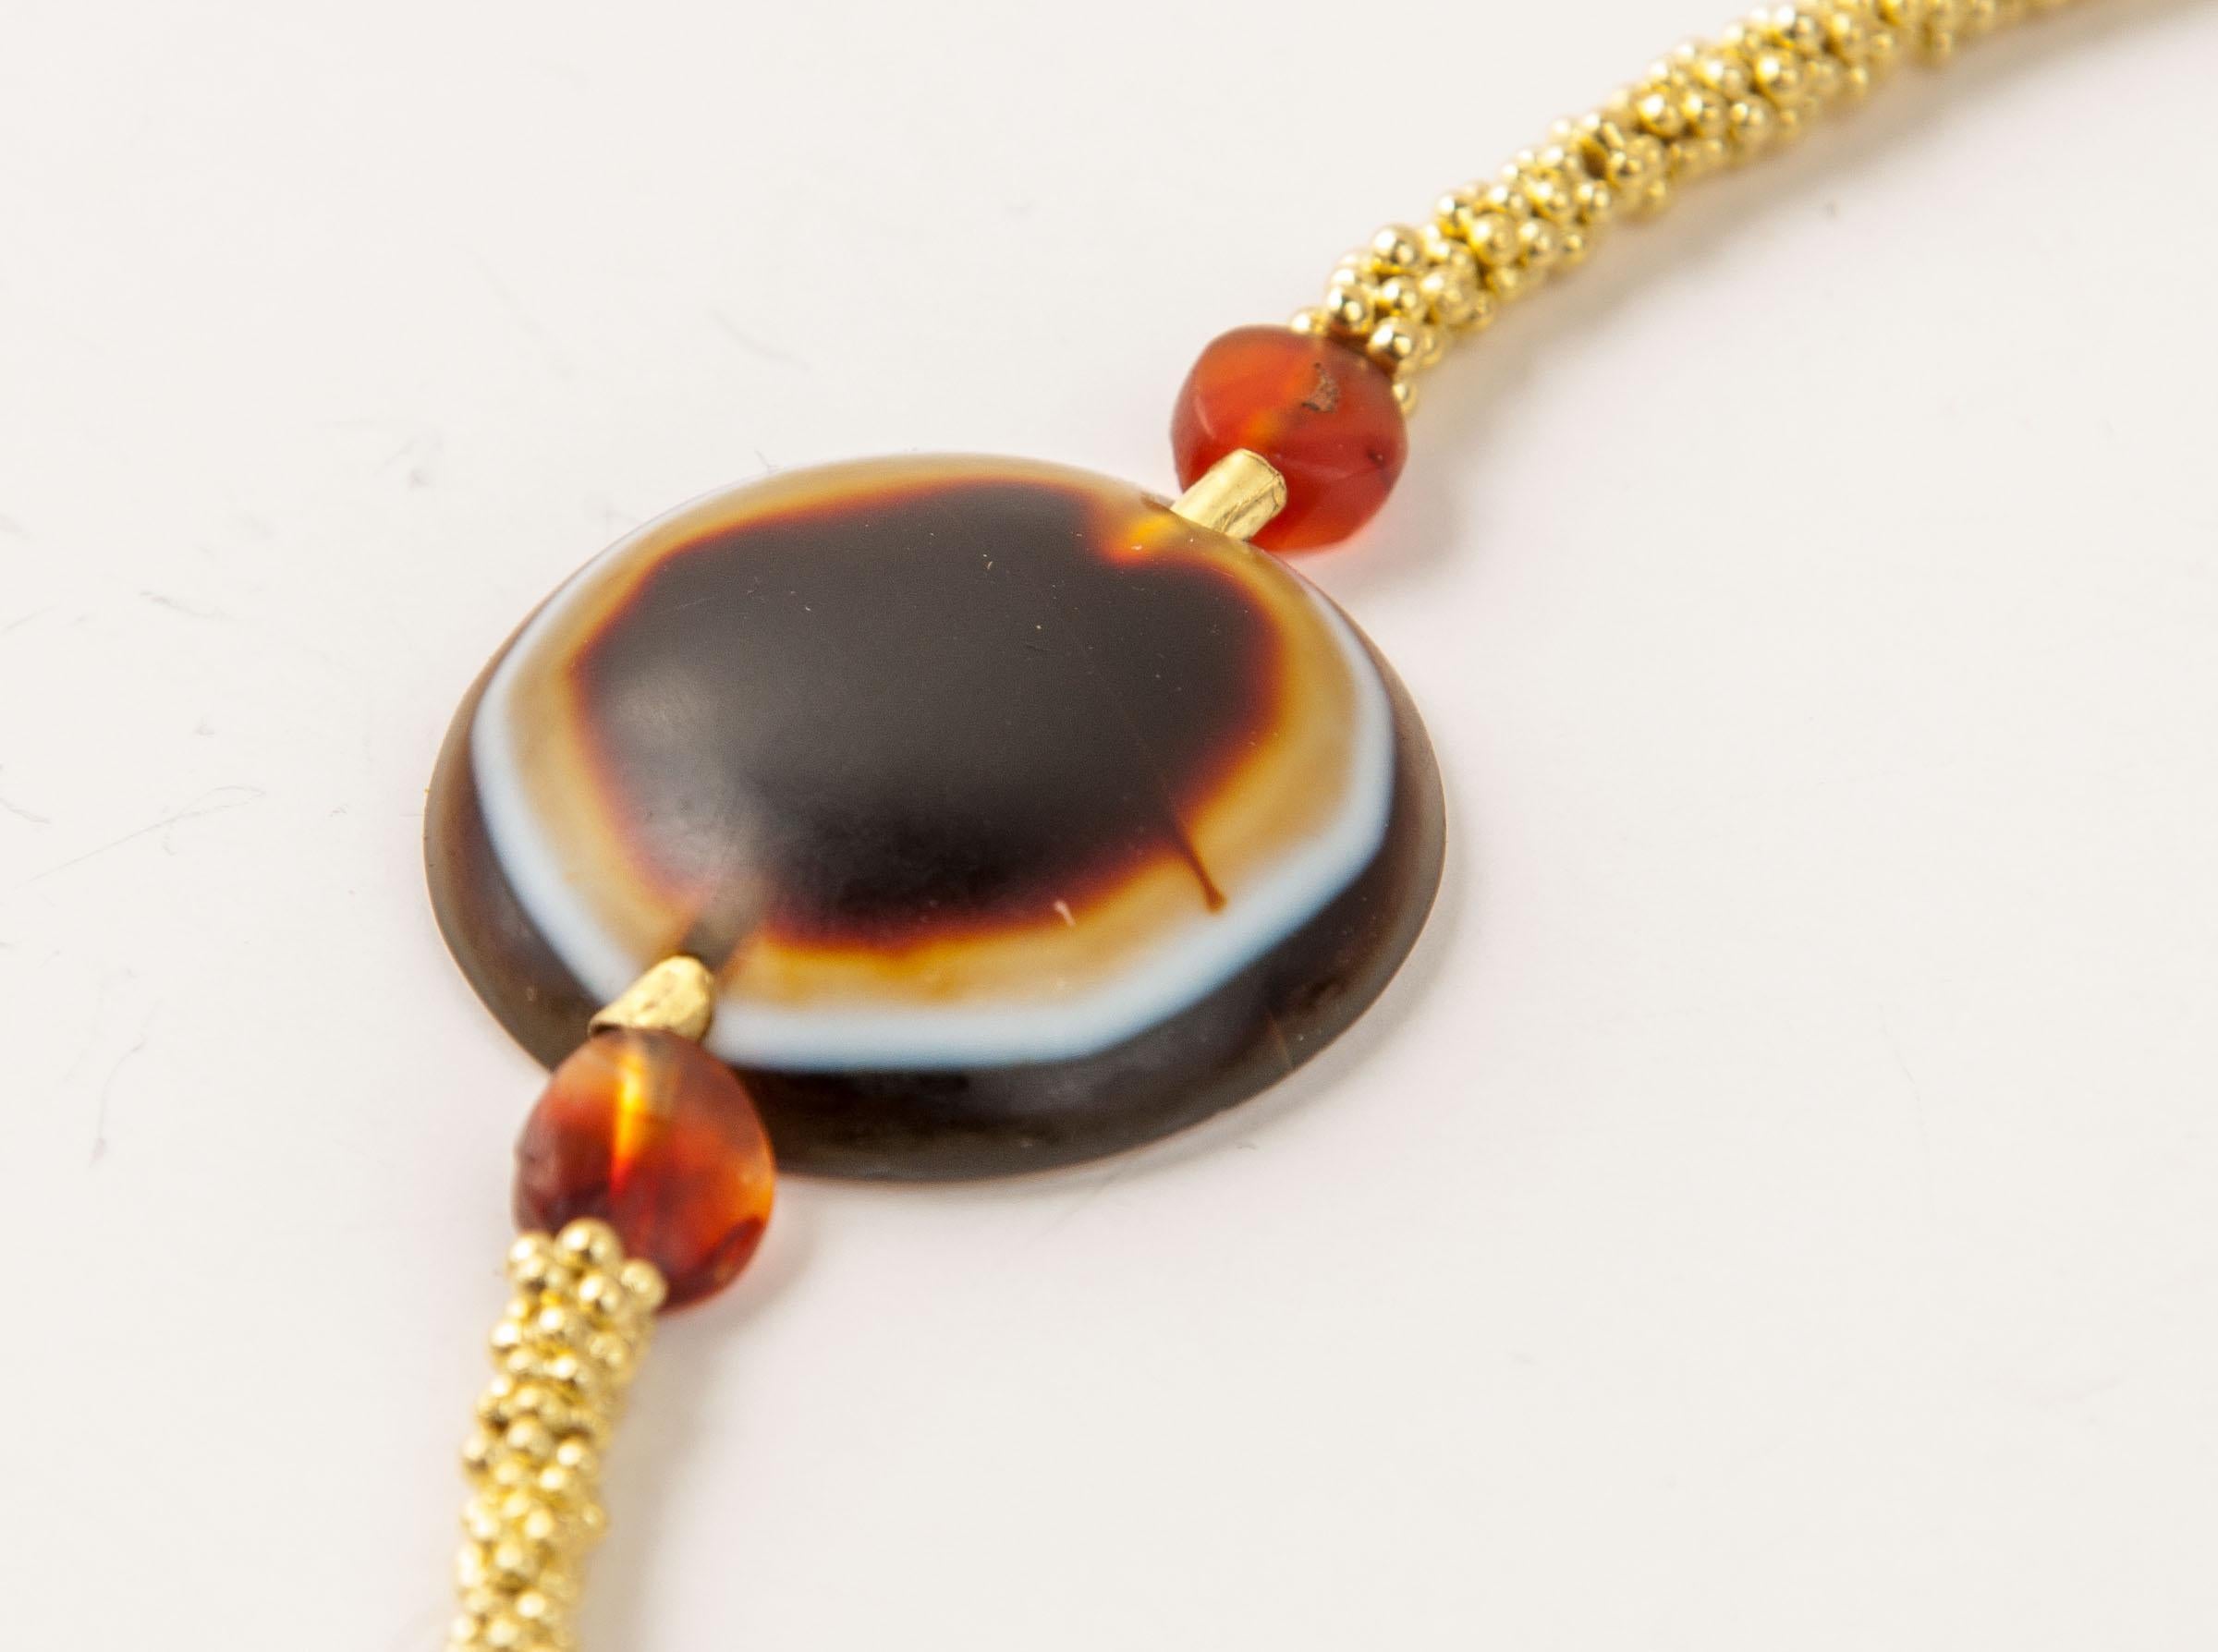 Two hundred fifty six-ball granulated ring spacers, four tabular carnelian beads and a tabular agate ”eye” bead. The eye bead is 2.3 cm in diameter and 5.9 mm in thickness. The diameter of the drill hole is 2 mm. The bead is slightly domed on the